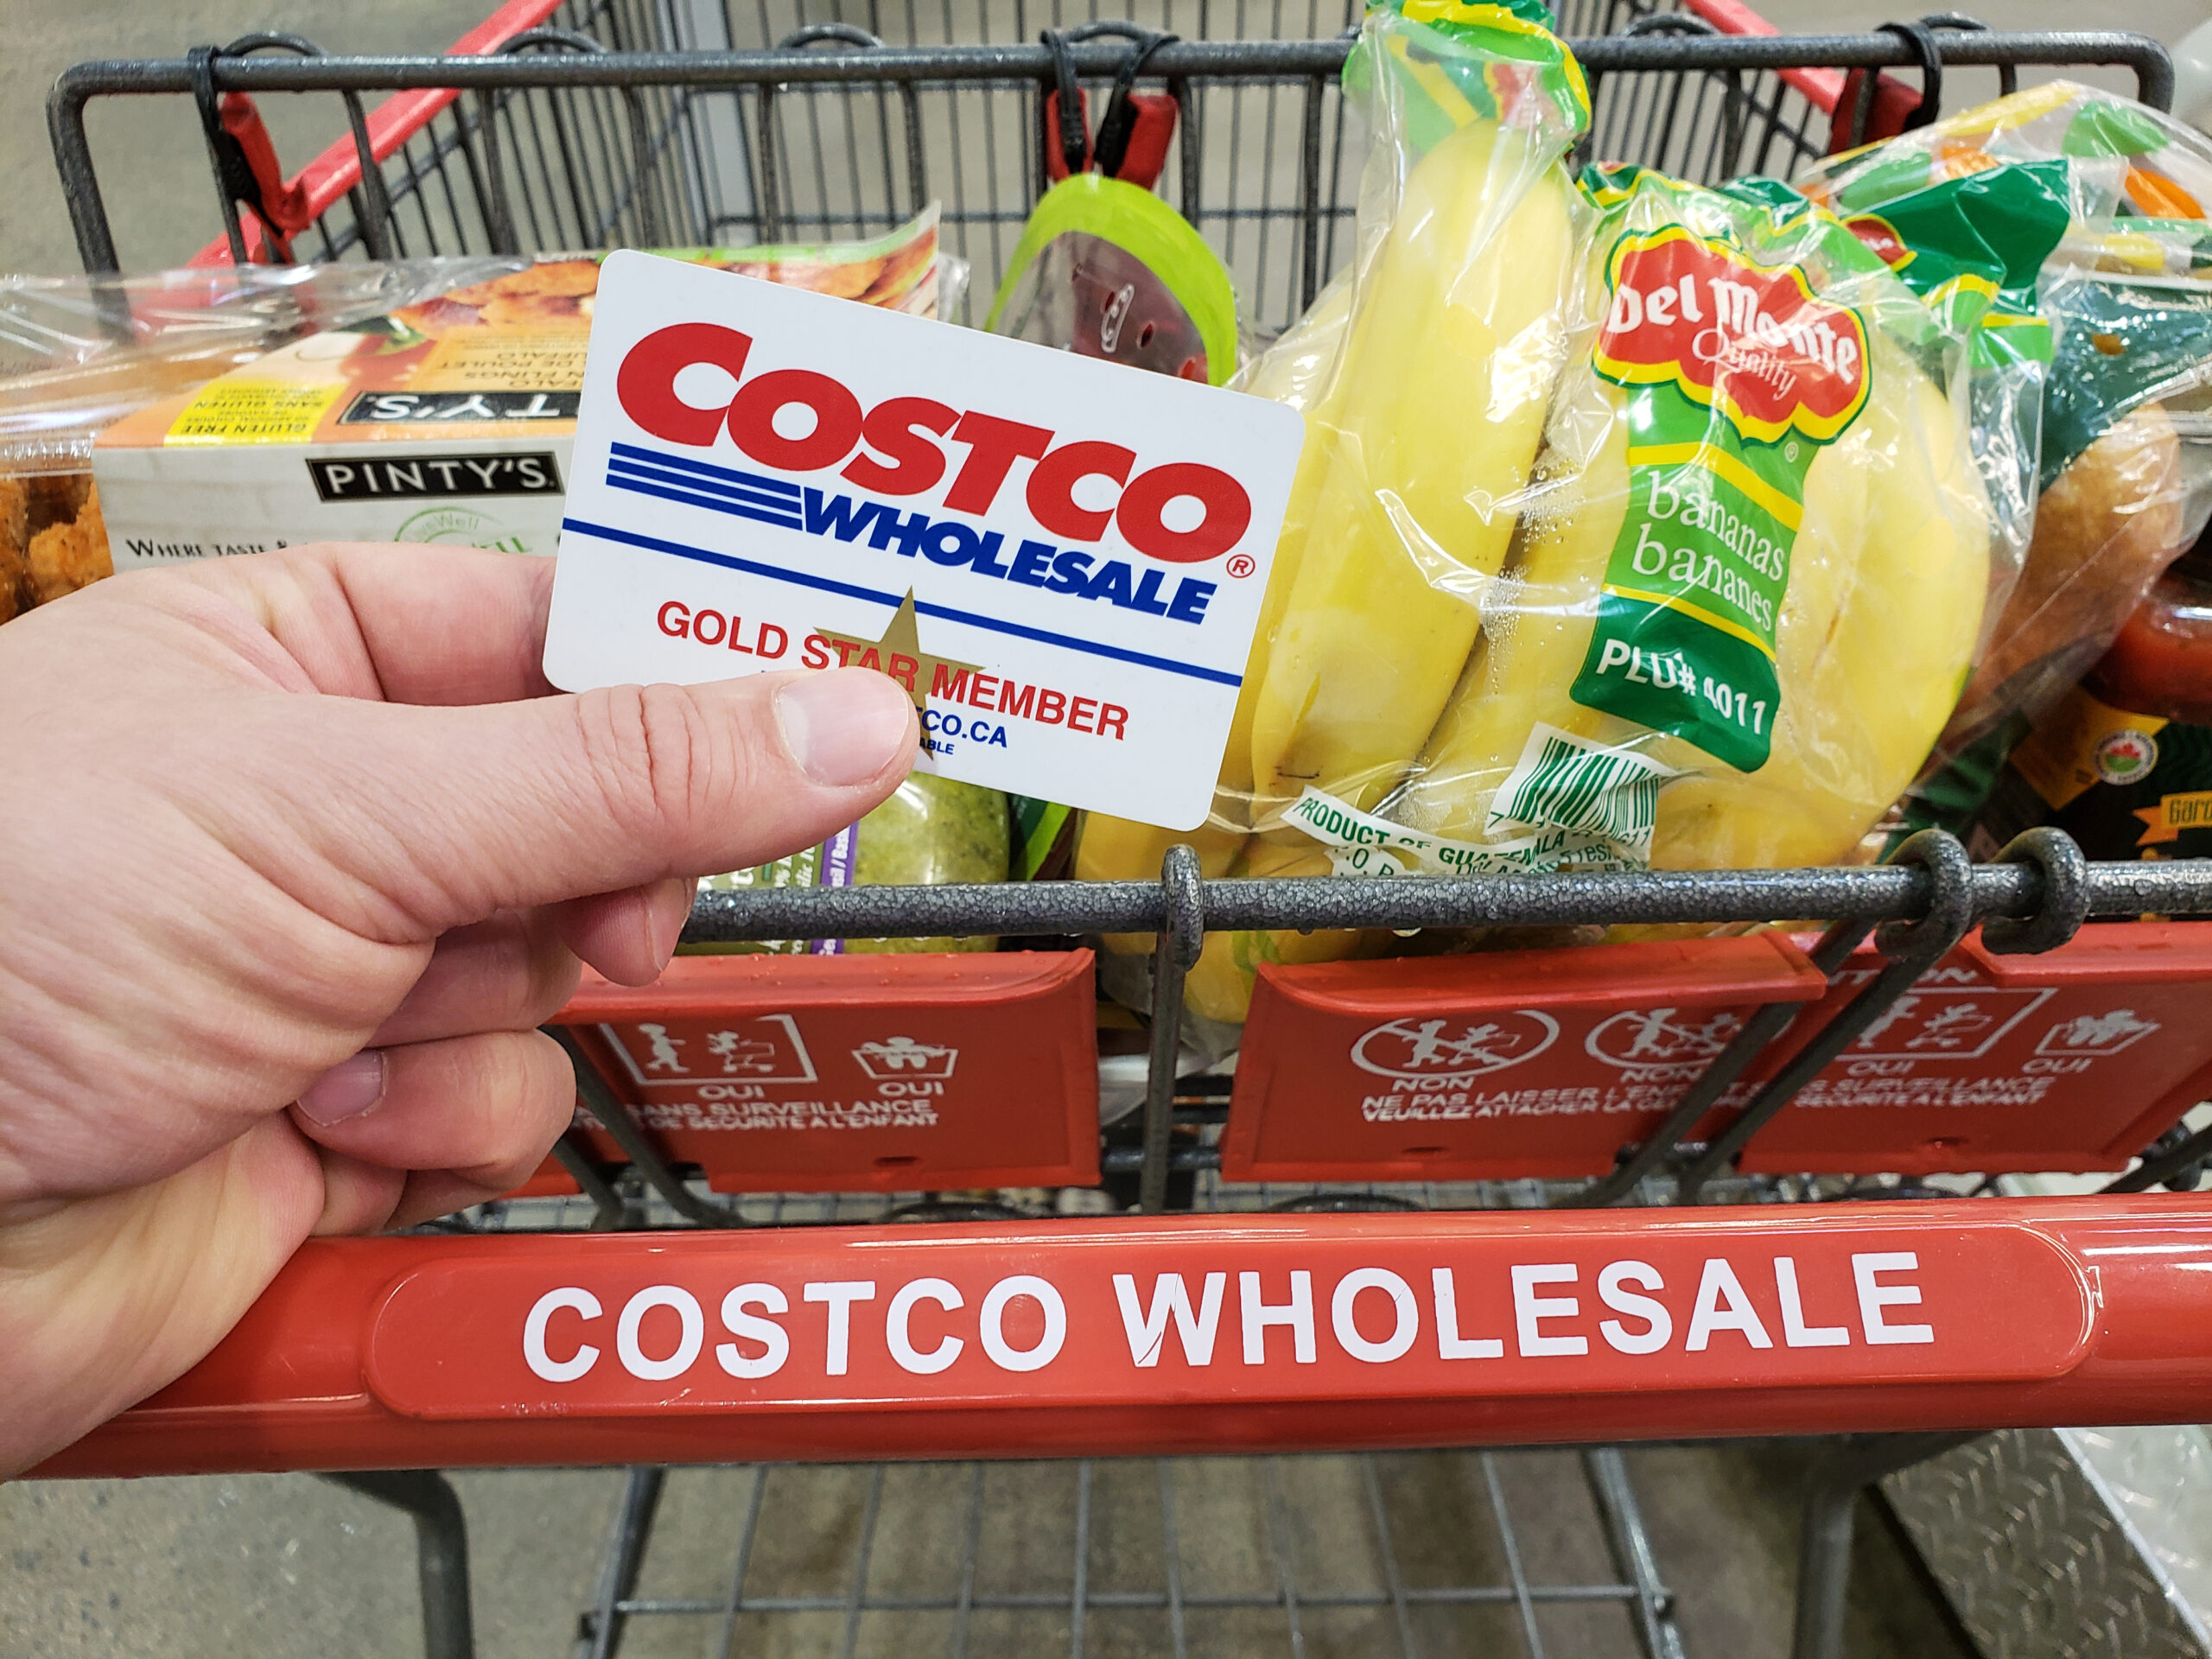 how-to-find-clothing-deals-at-costco,-according-to-experts